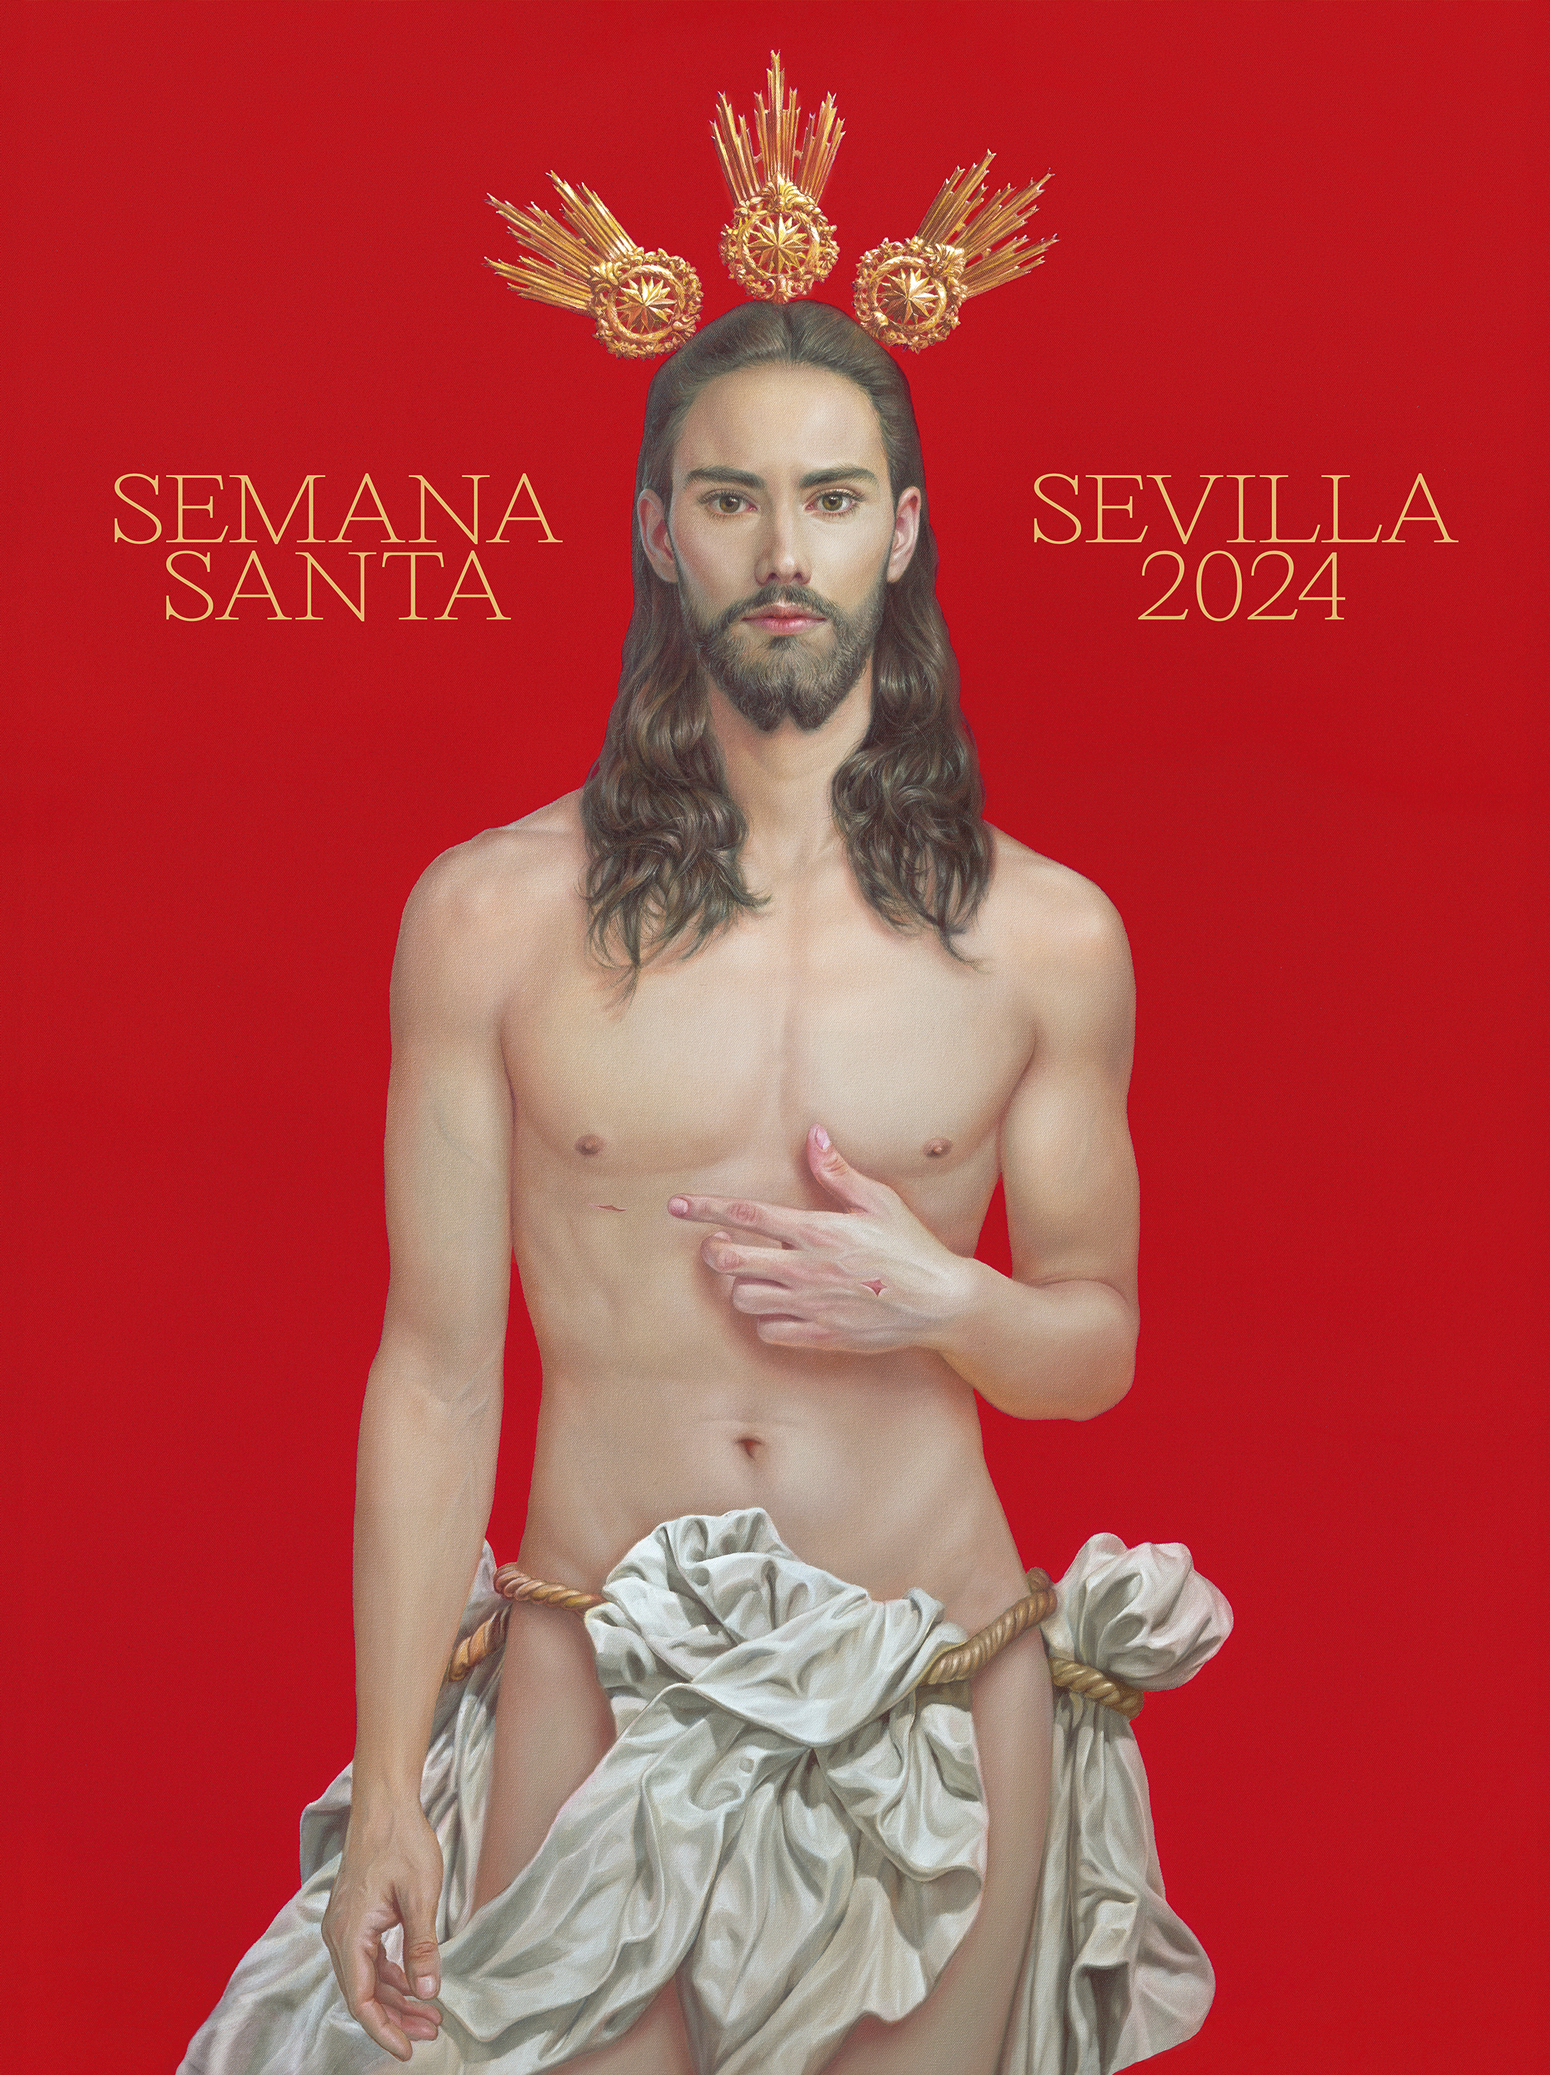 A poster by Seville artist Salustiano Garcia Cruz depicts a young, handsome, fit and fresh-faced Jesus wearing a shroud as loincloth. There is no crown of thorns, no suffering face and just two tiny stab wounds on the hand and ribcage.